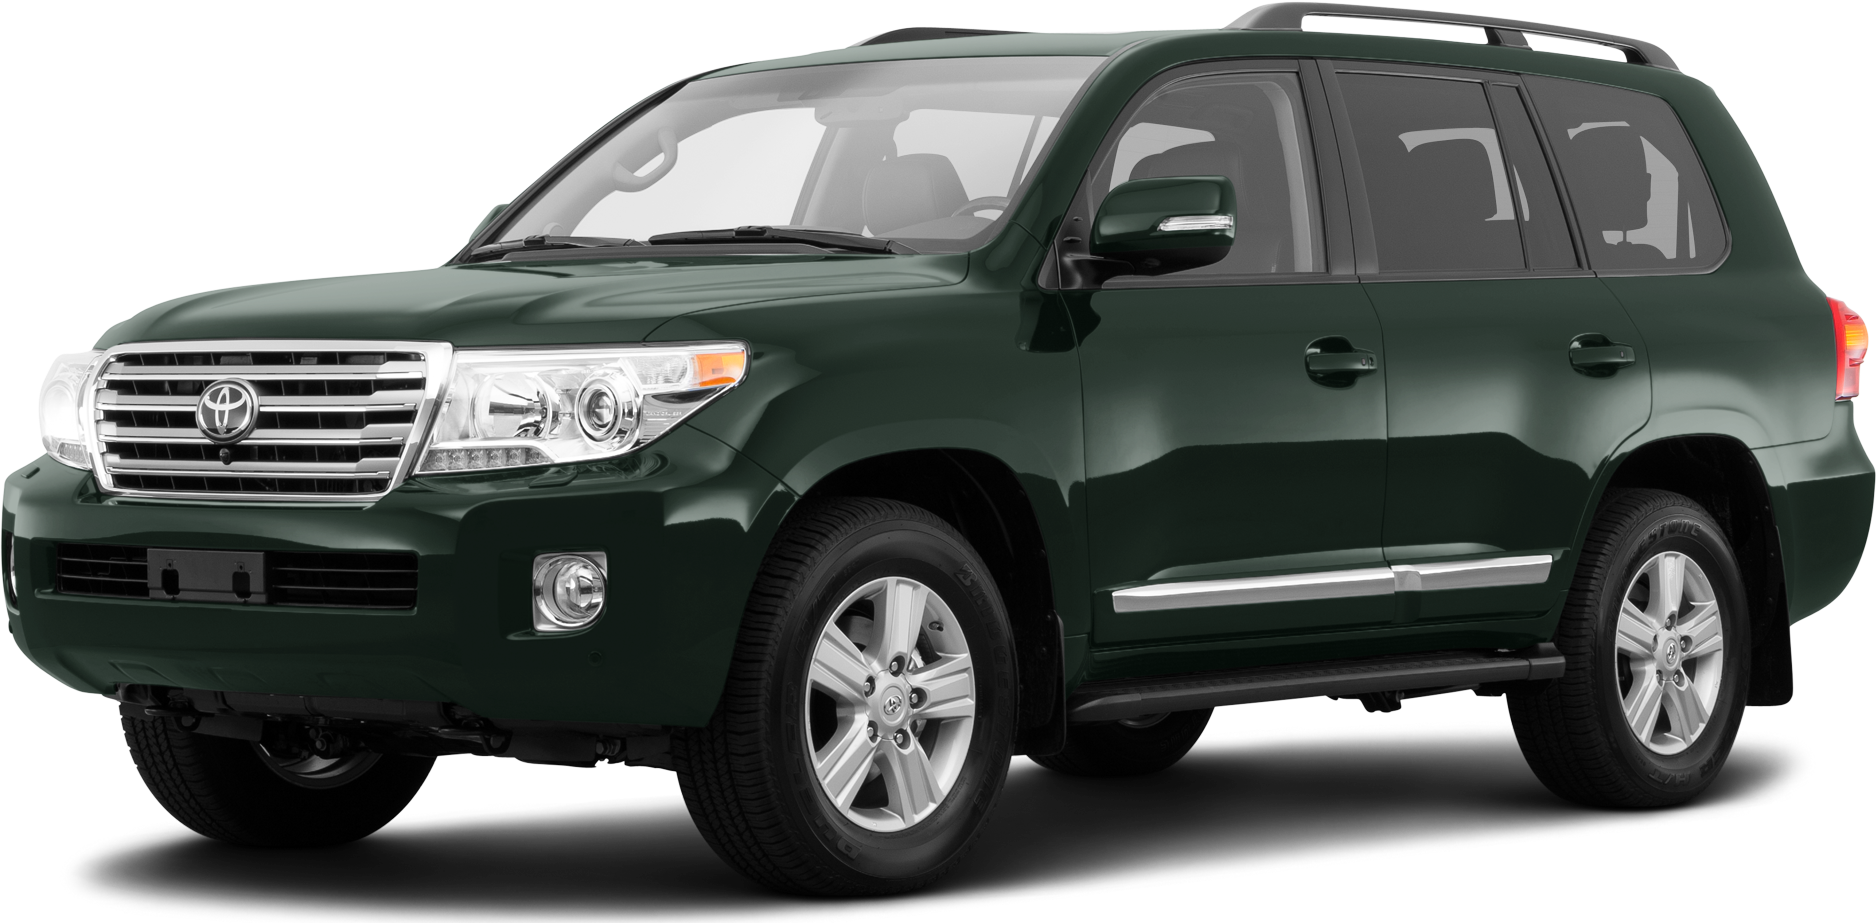 2014 Toyota Land Cruiser Price, Value, Ratings & Reviews Kelley Blue Book